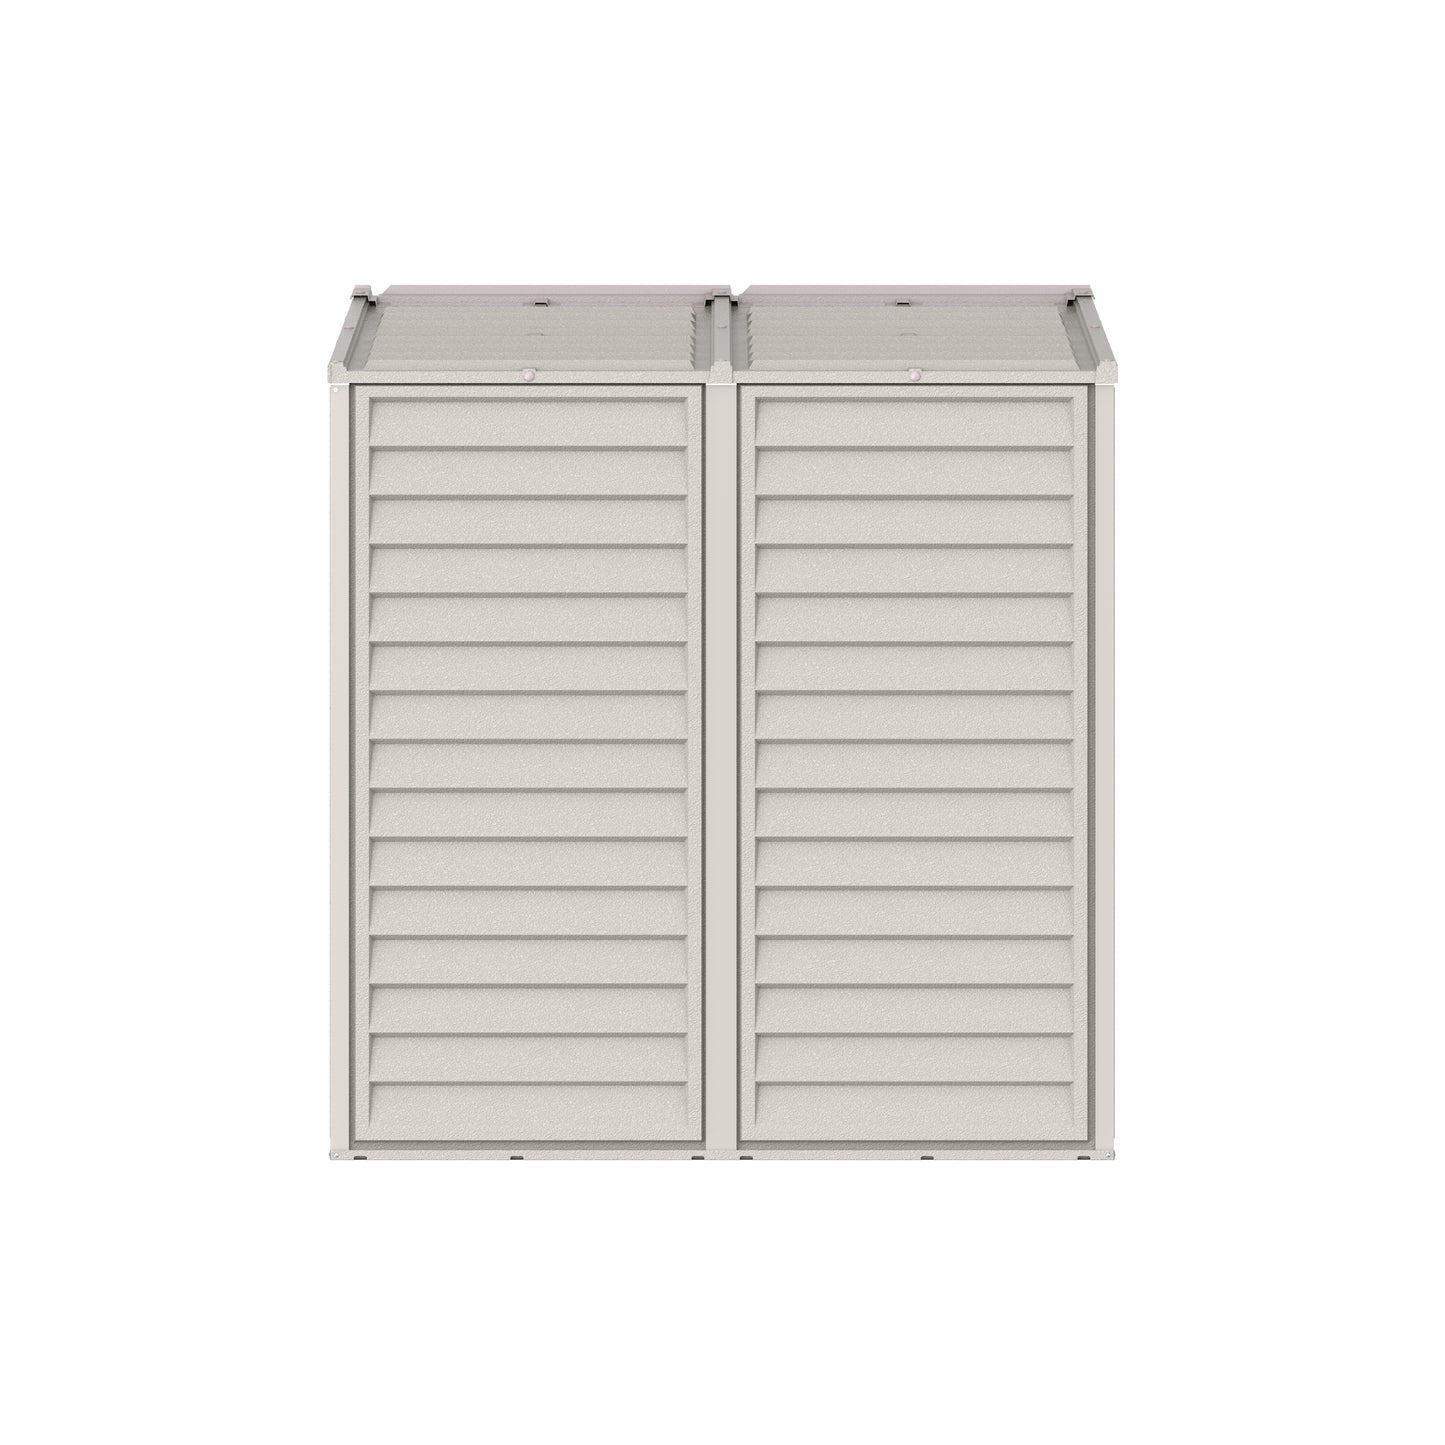 DuraMate 8x5.5ft (239.7x162.8x187.5 cm) Resin Storage Shed